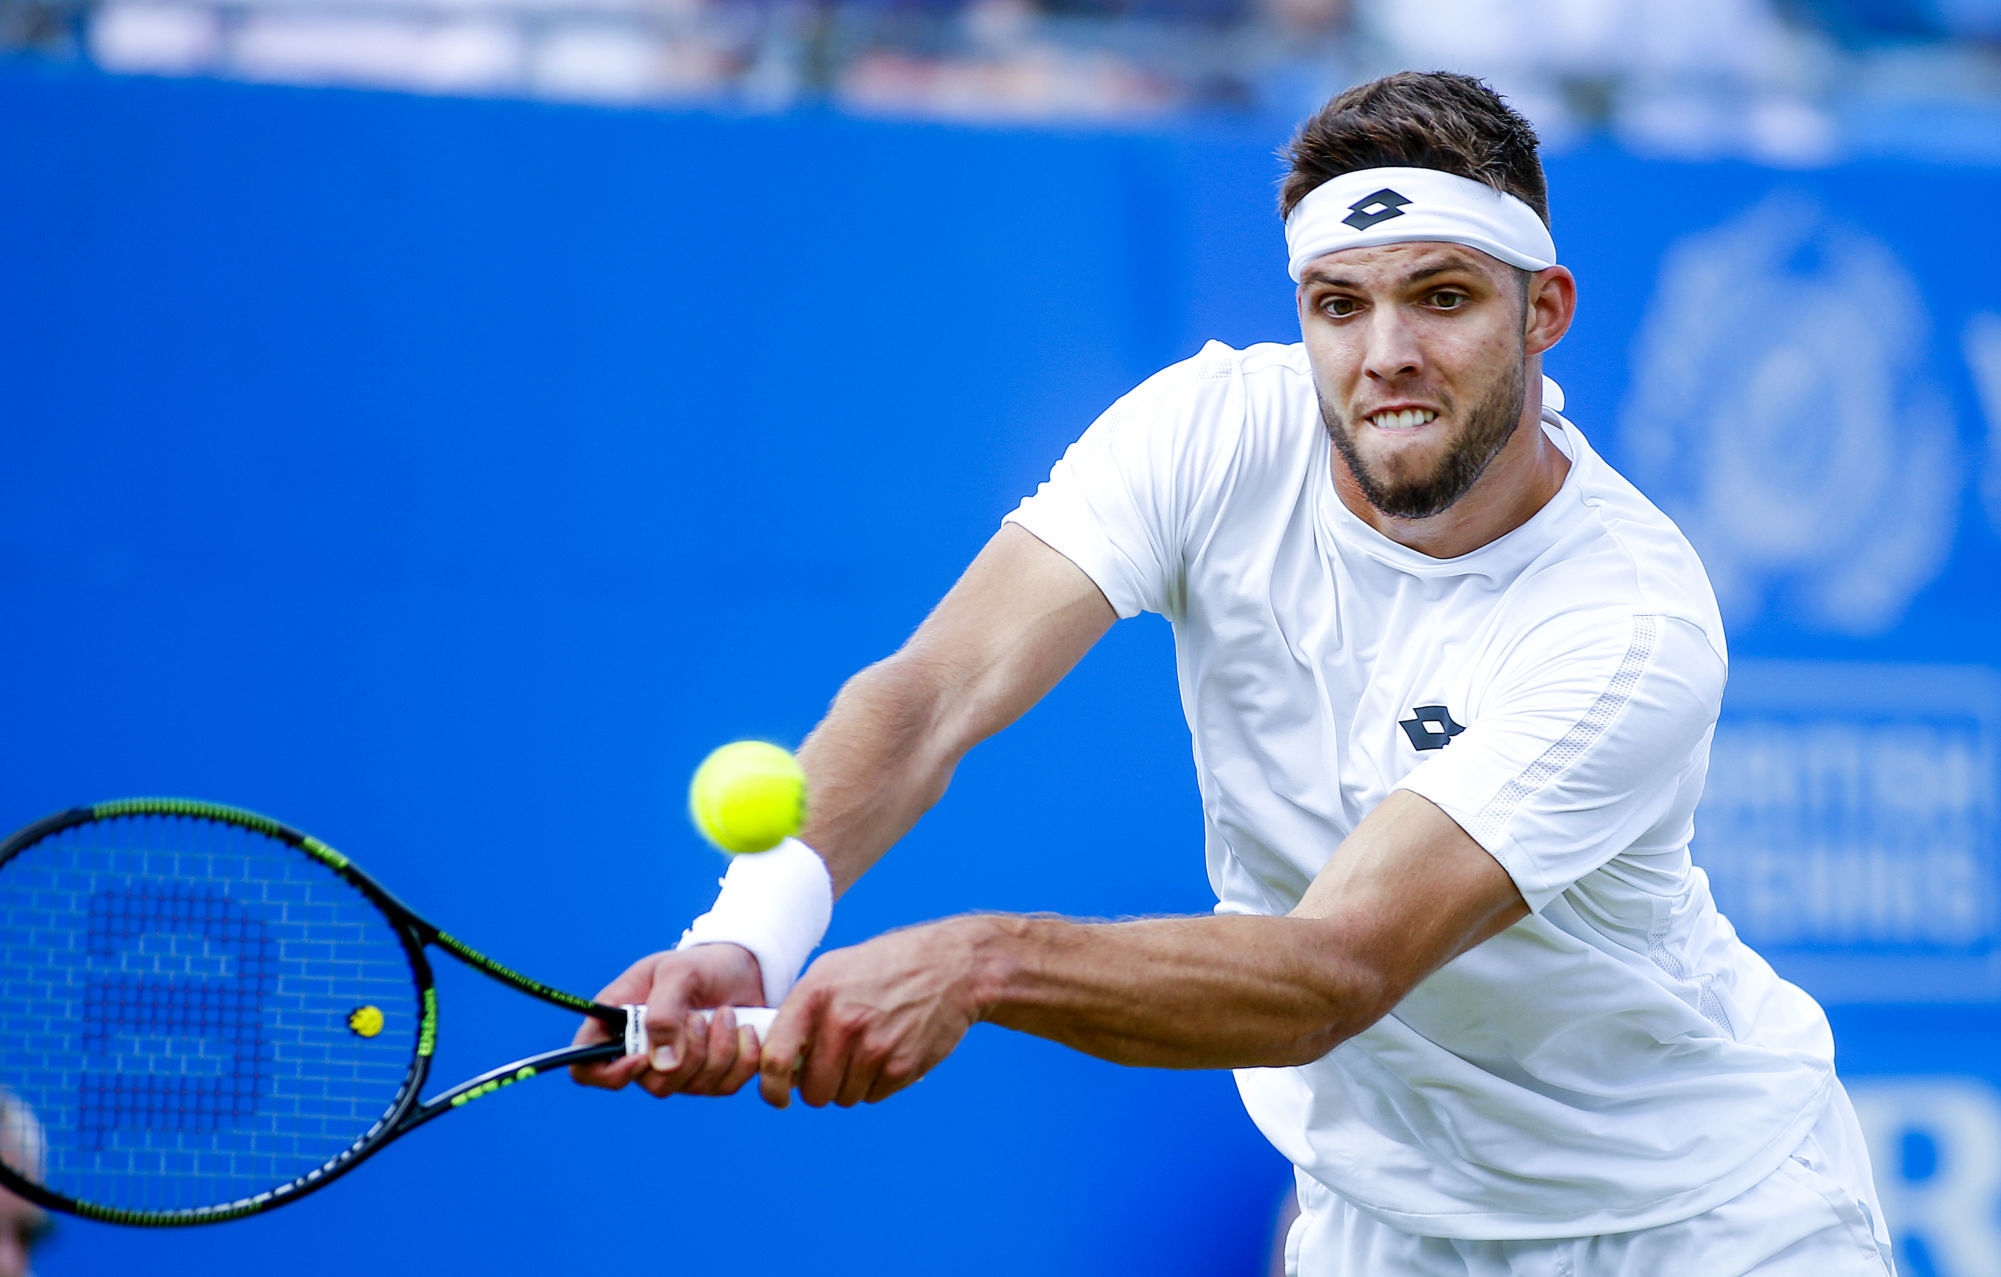 Czech Republic Jiri Vesely in action during day four of the 2016 AEGON Championships at The Queen's Club, London.